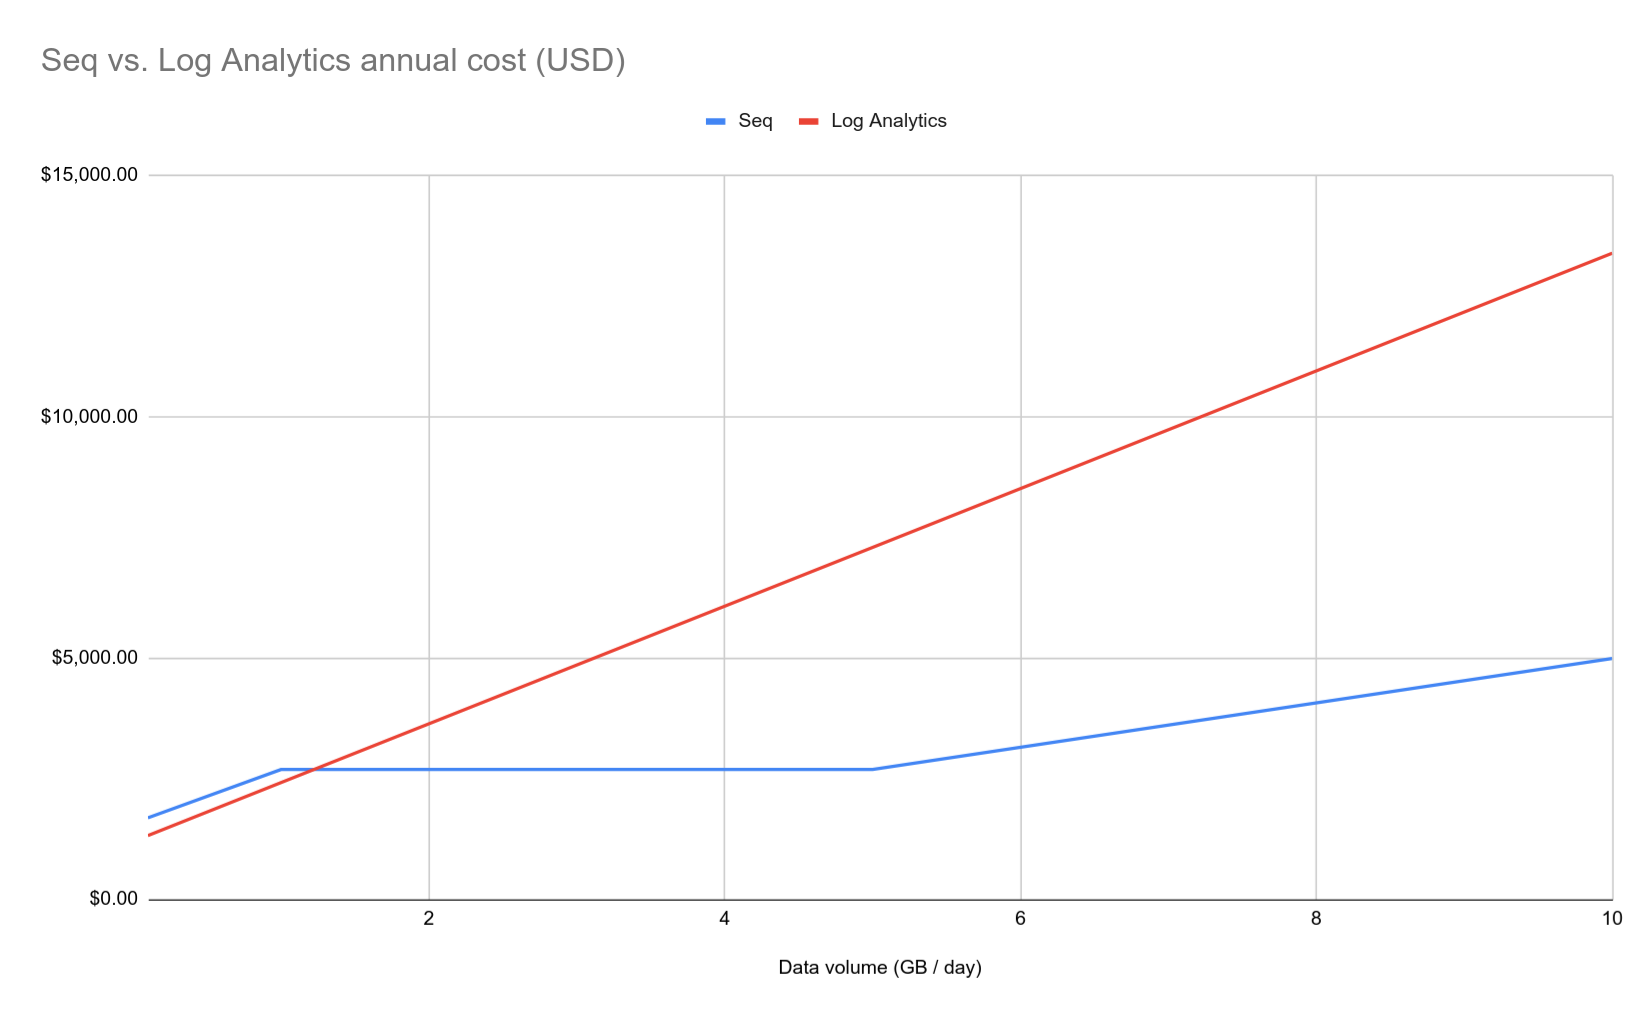 Chart showing that Log Analytics costs grow much faster than Seq costs